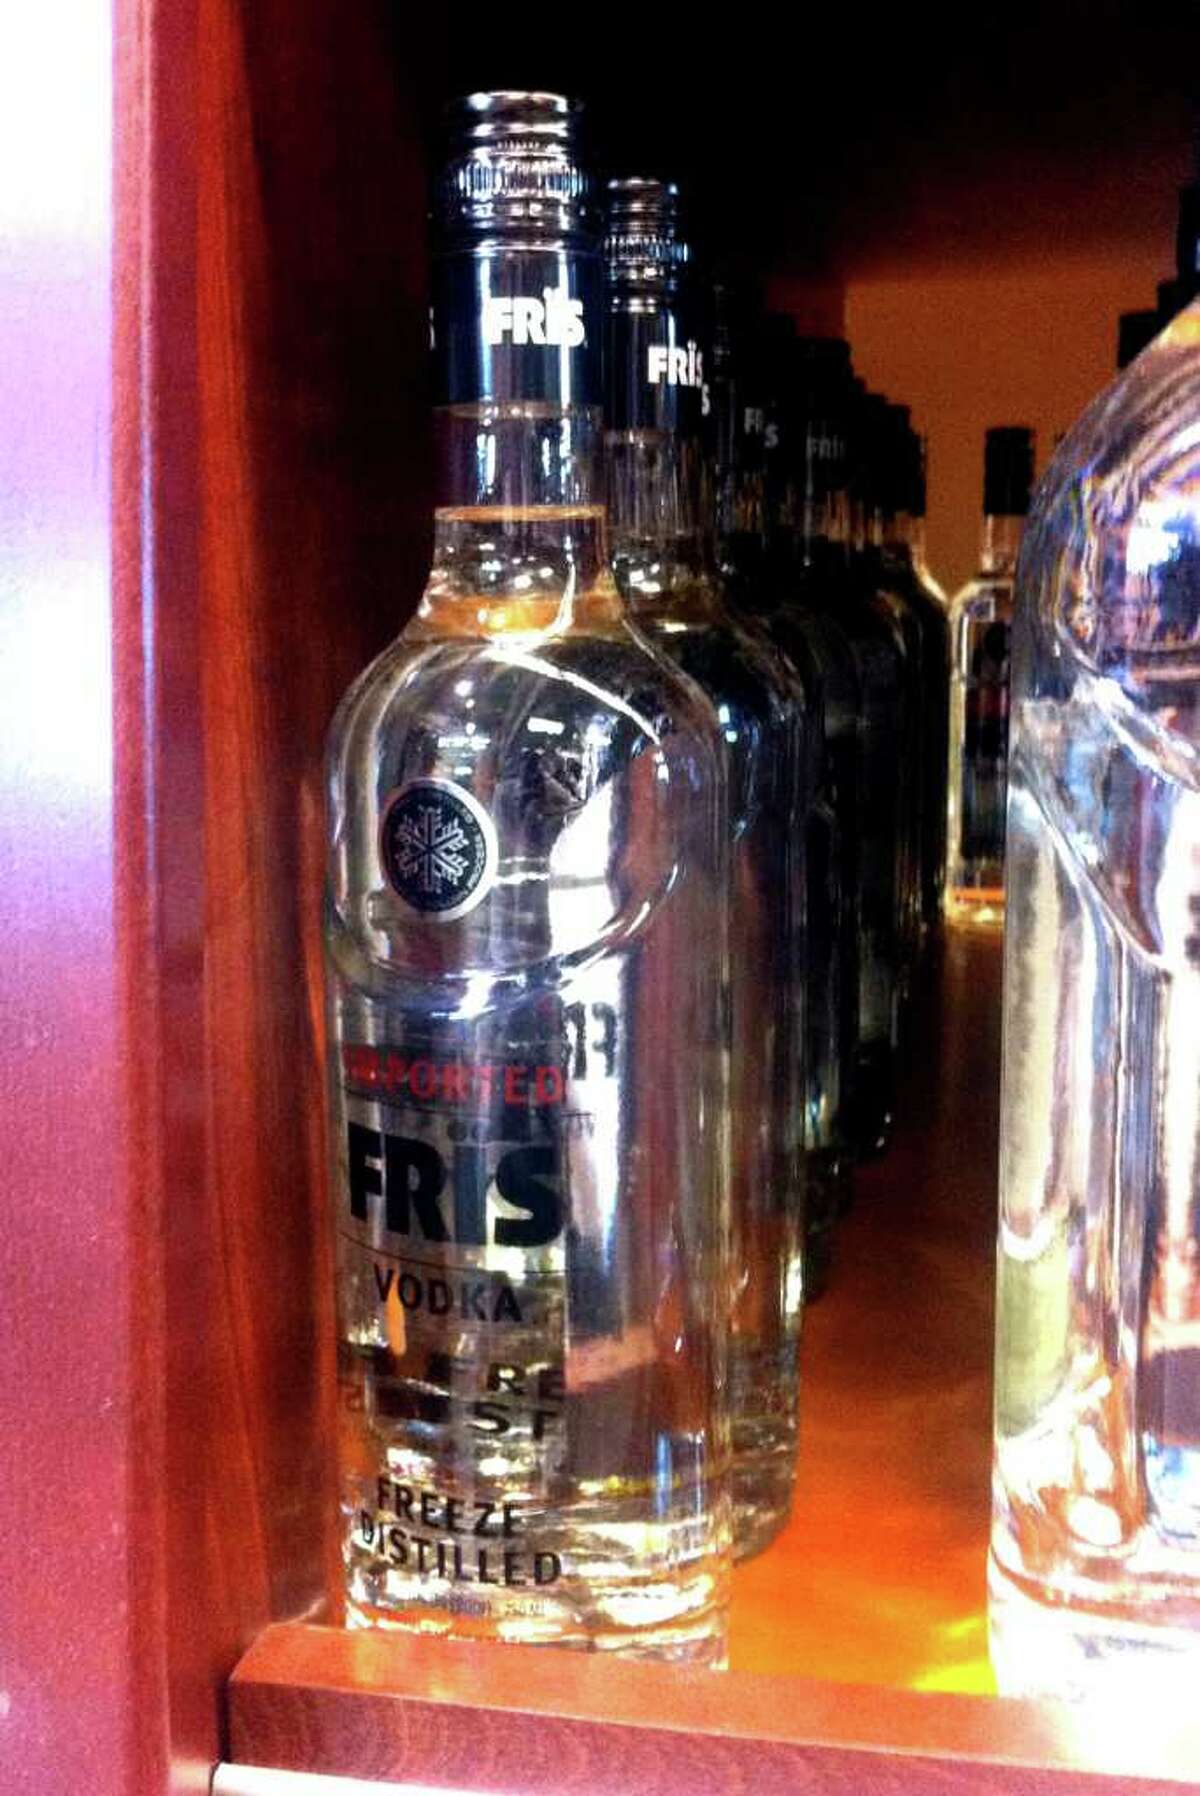 No. 10: Fris imported vodka has been a hot seller in Seattle this year and doing better than Absolut Vodka, which as a 750 ml bottle was tenth bestselling spirit in Seattle last year.